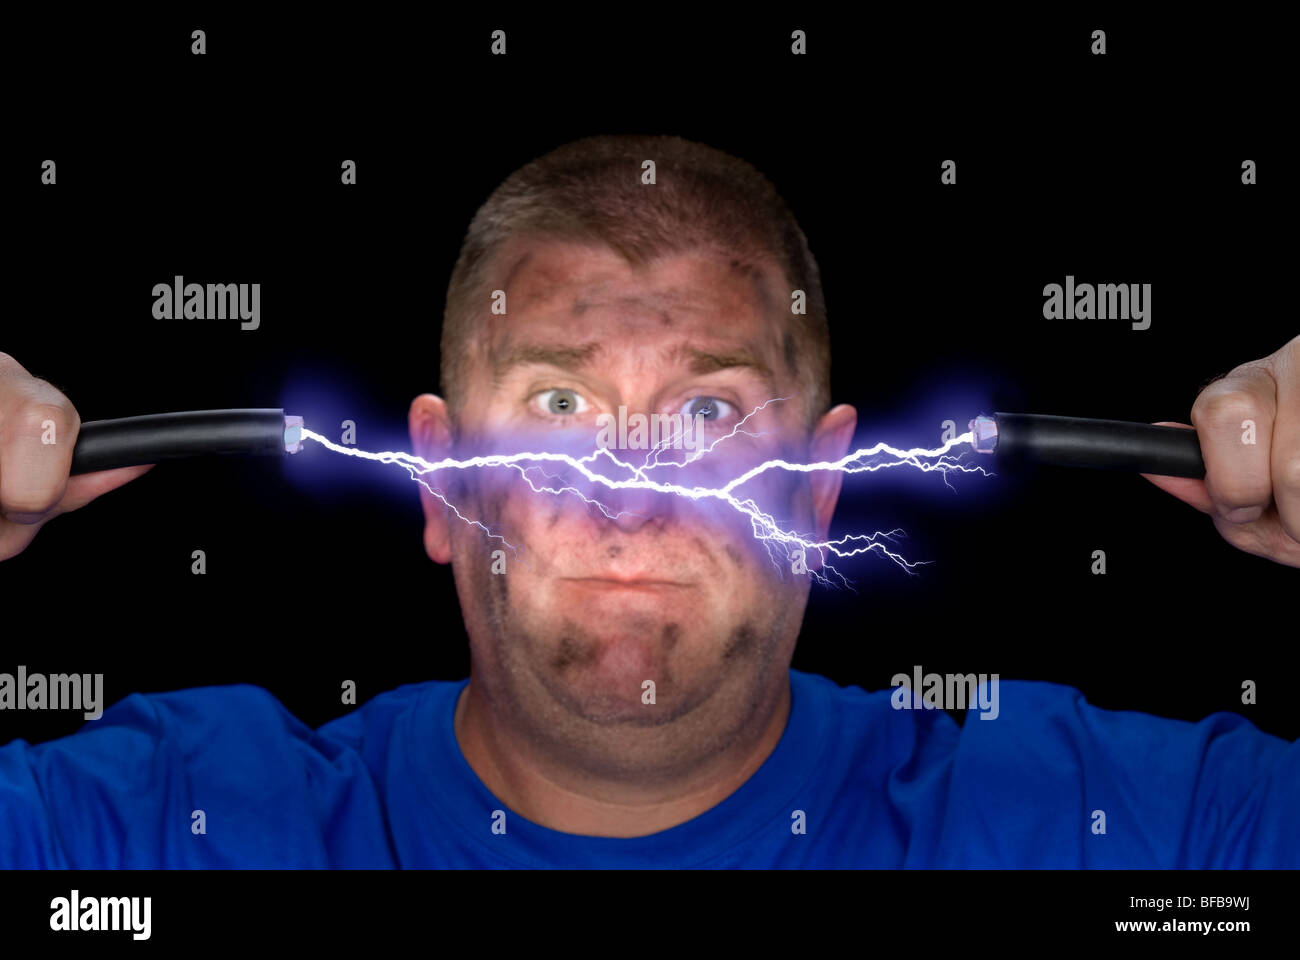 An electrician plays with some live wires, causing an arc of electricity and charring the man's face. Stock Photo